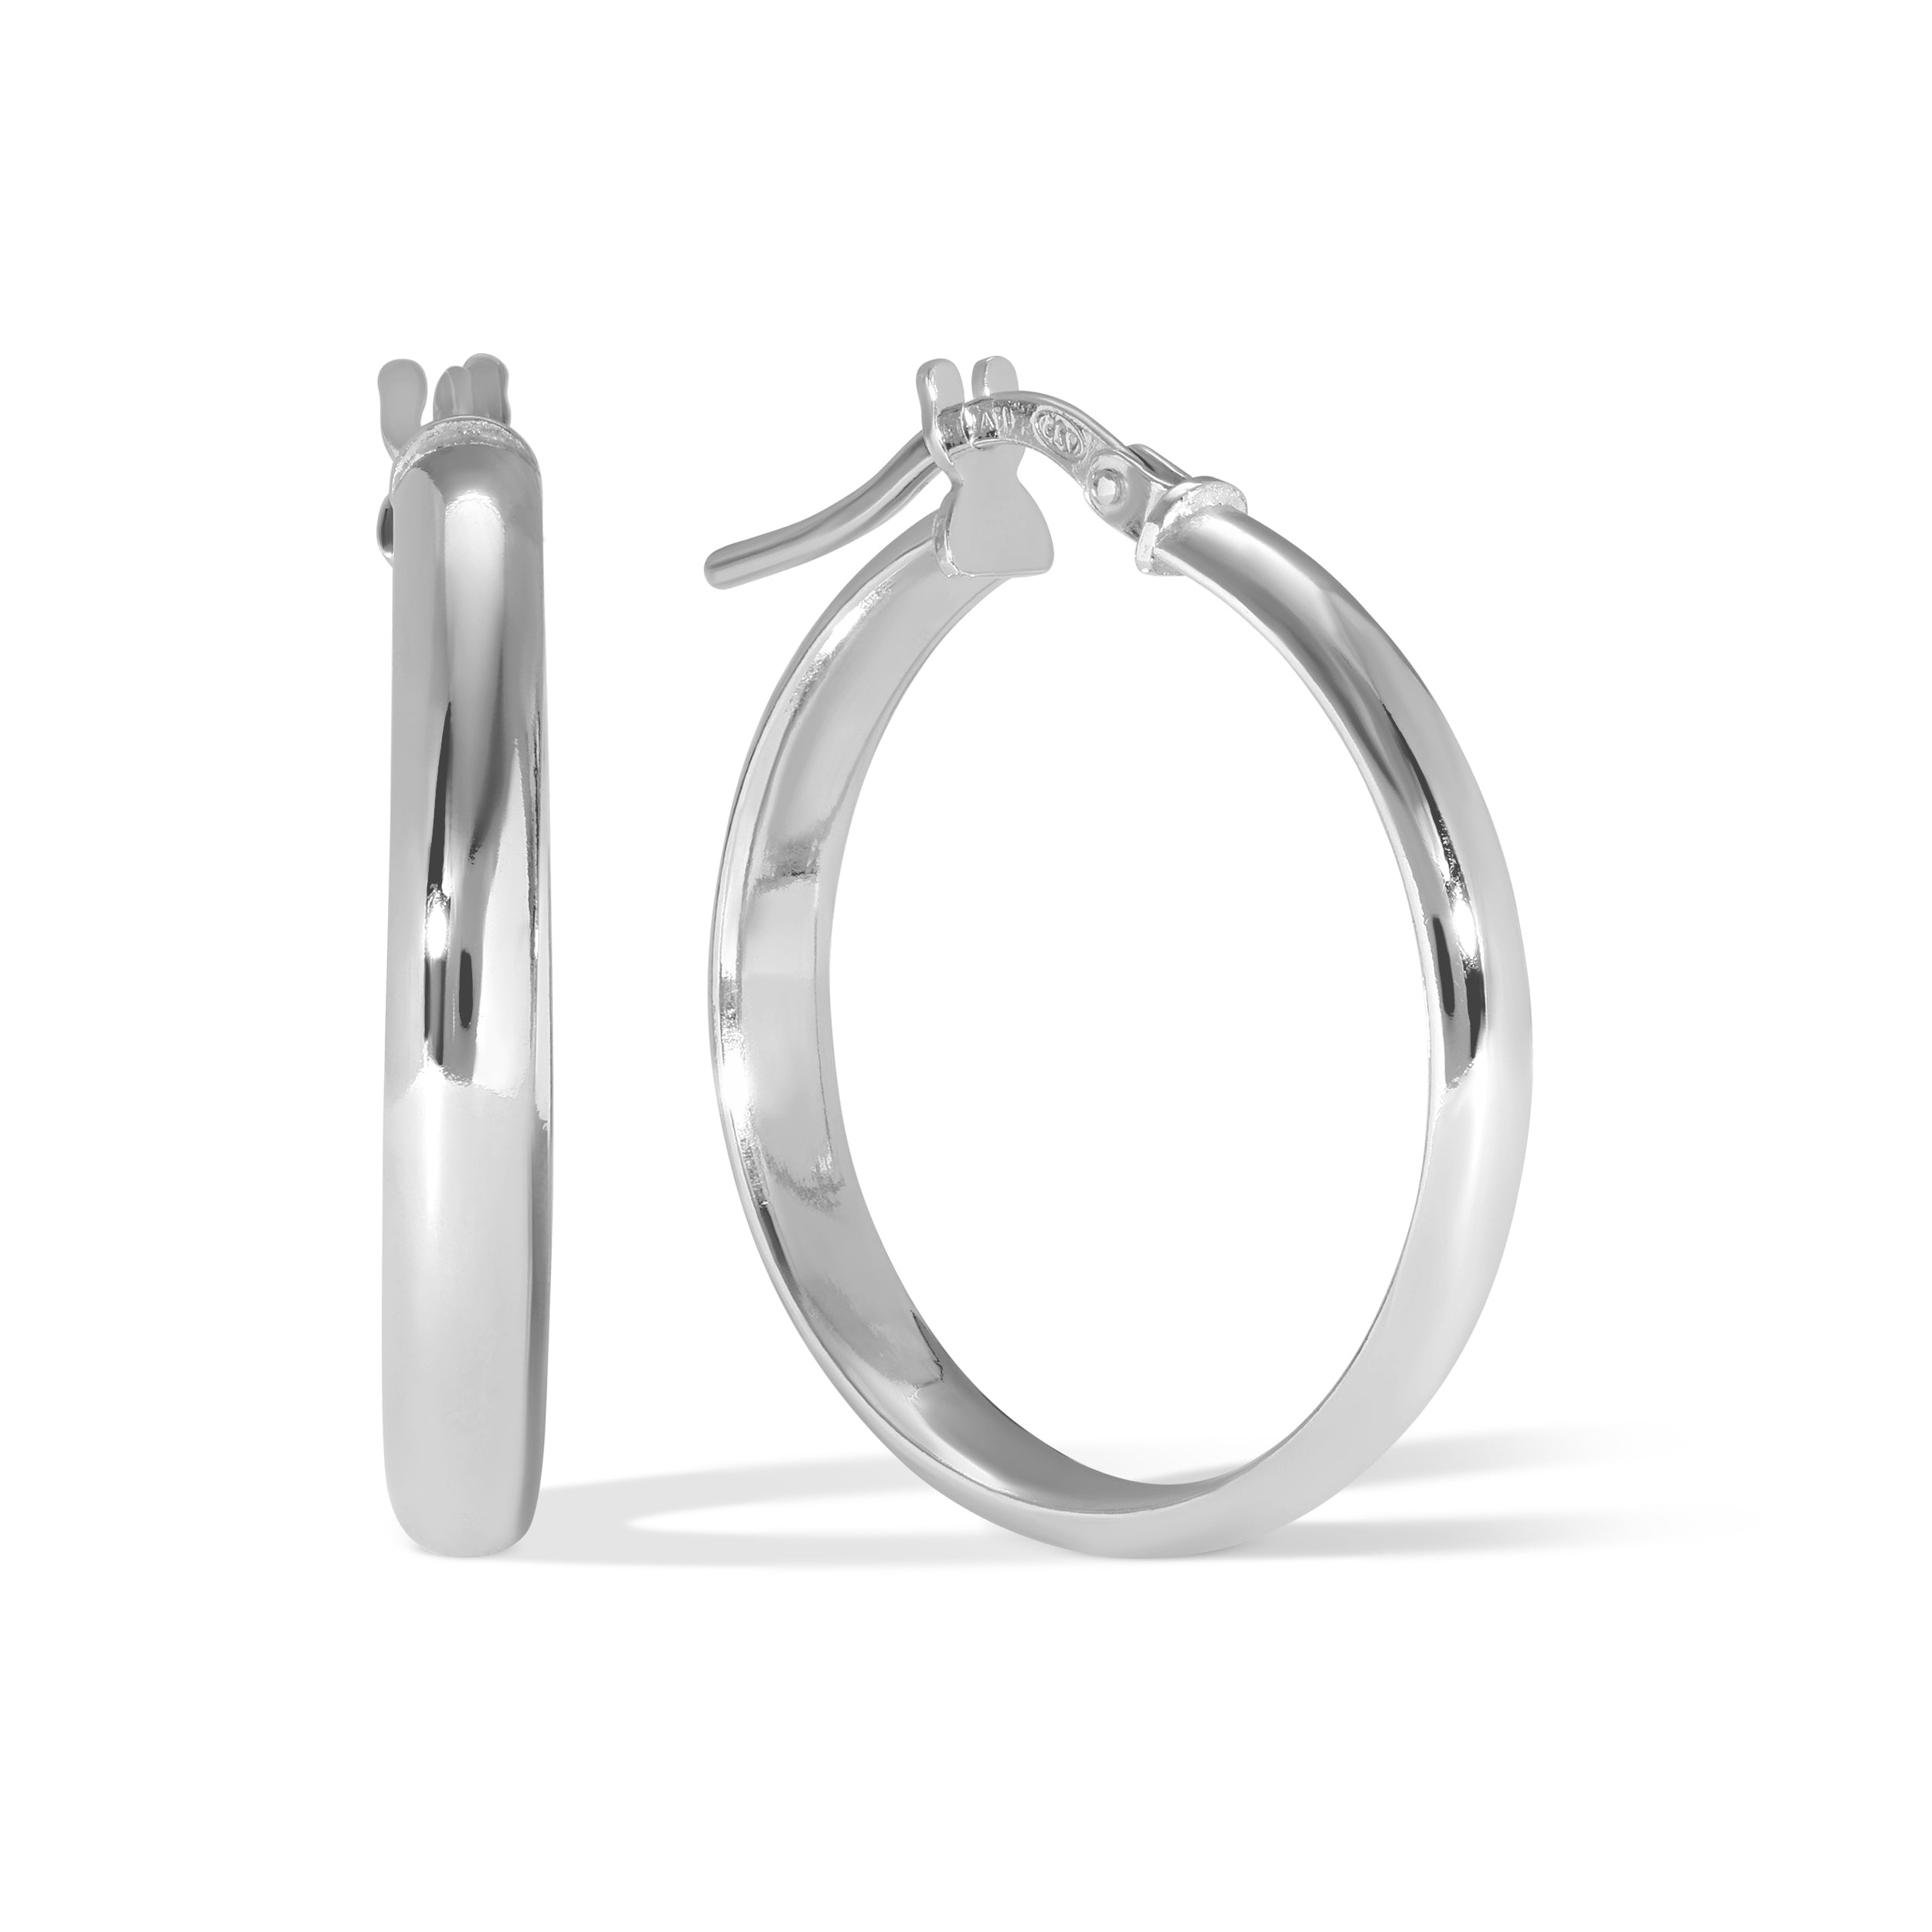 Thin Rounded Hoops